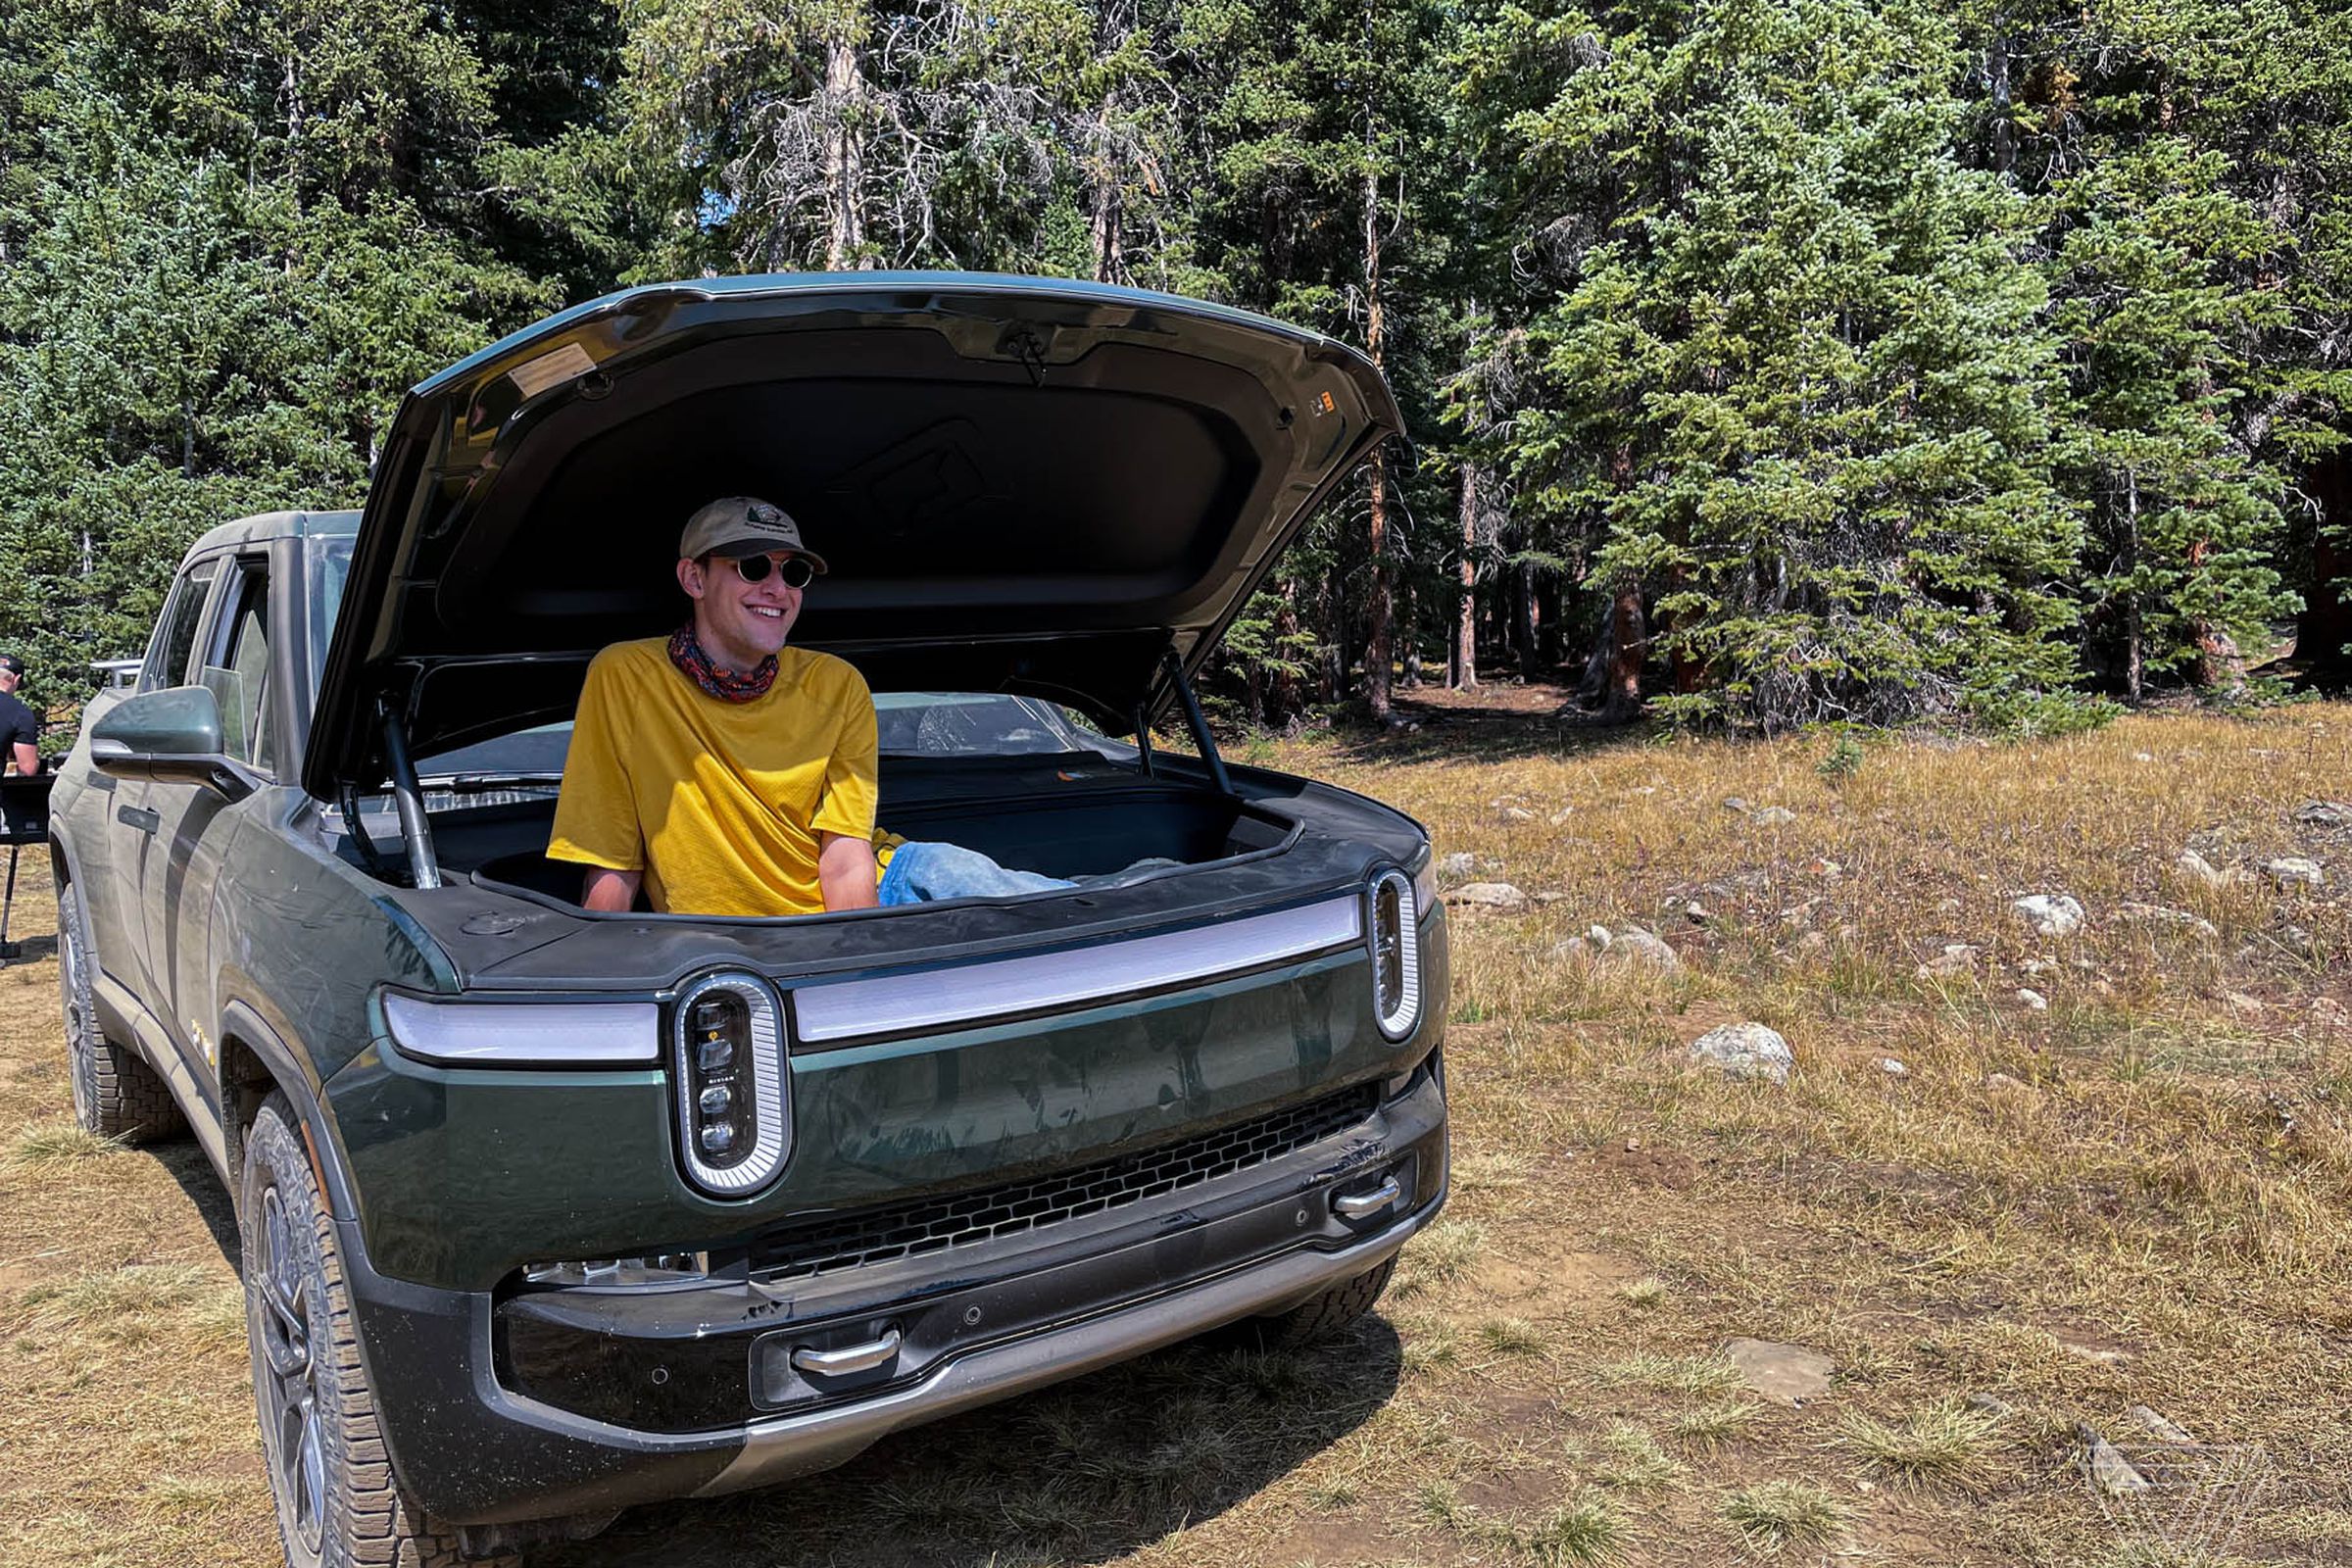 The Verge’s Mitchell Clark sits inside the Rivian R1T’s front trunk or frunk with the hood open as he grins at a trail he’ll embark on very soon.